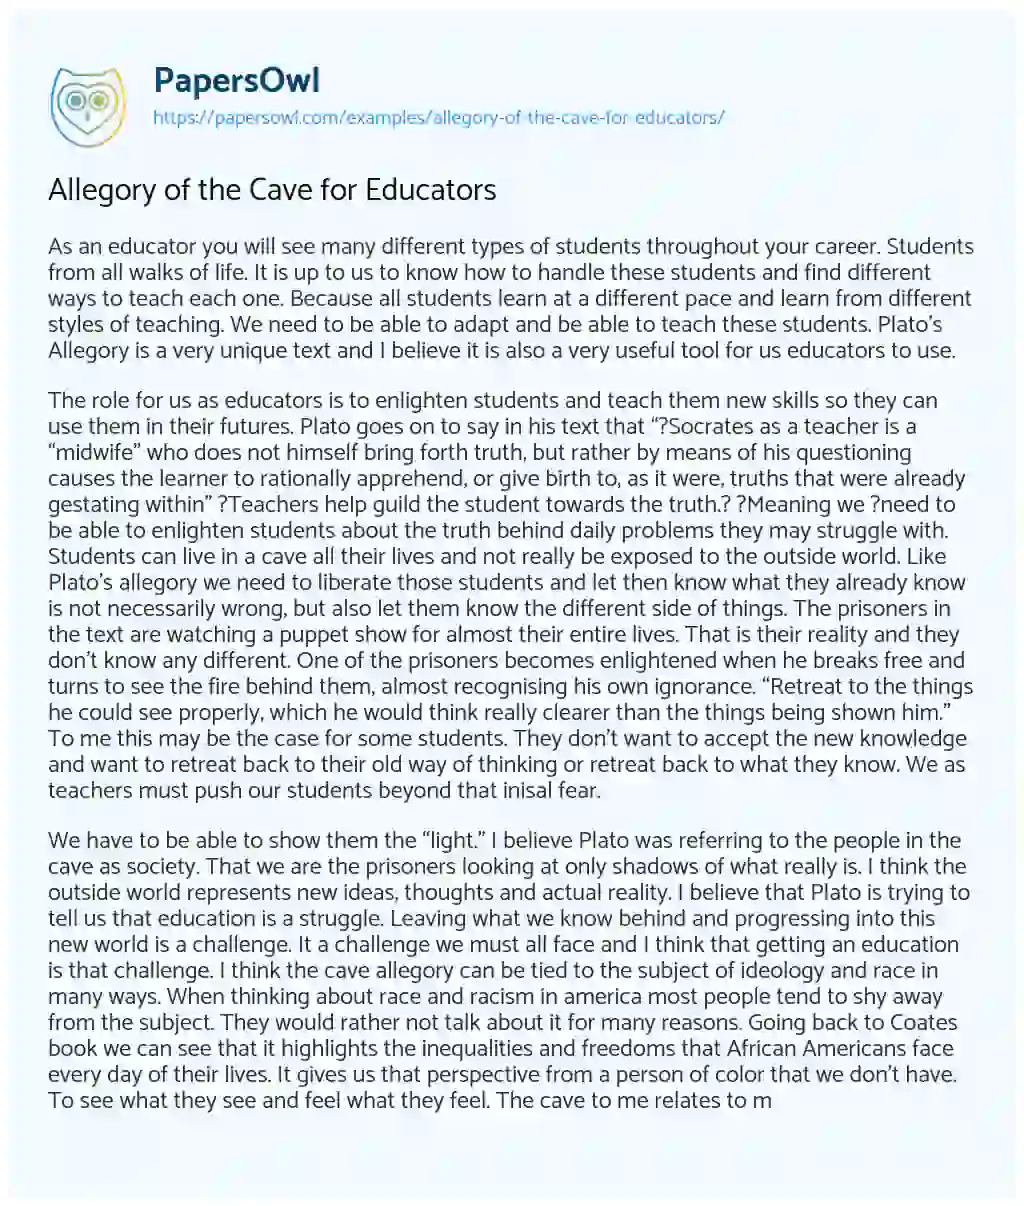 Essay on Allegory of the Cave for Educators